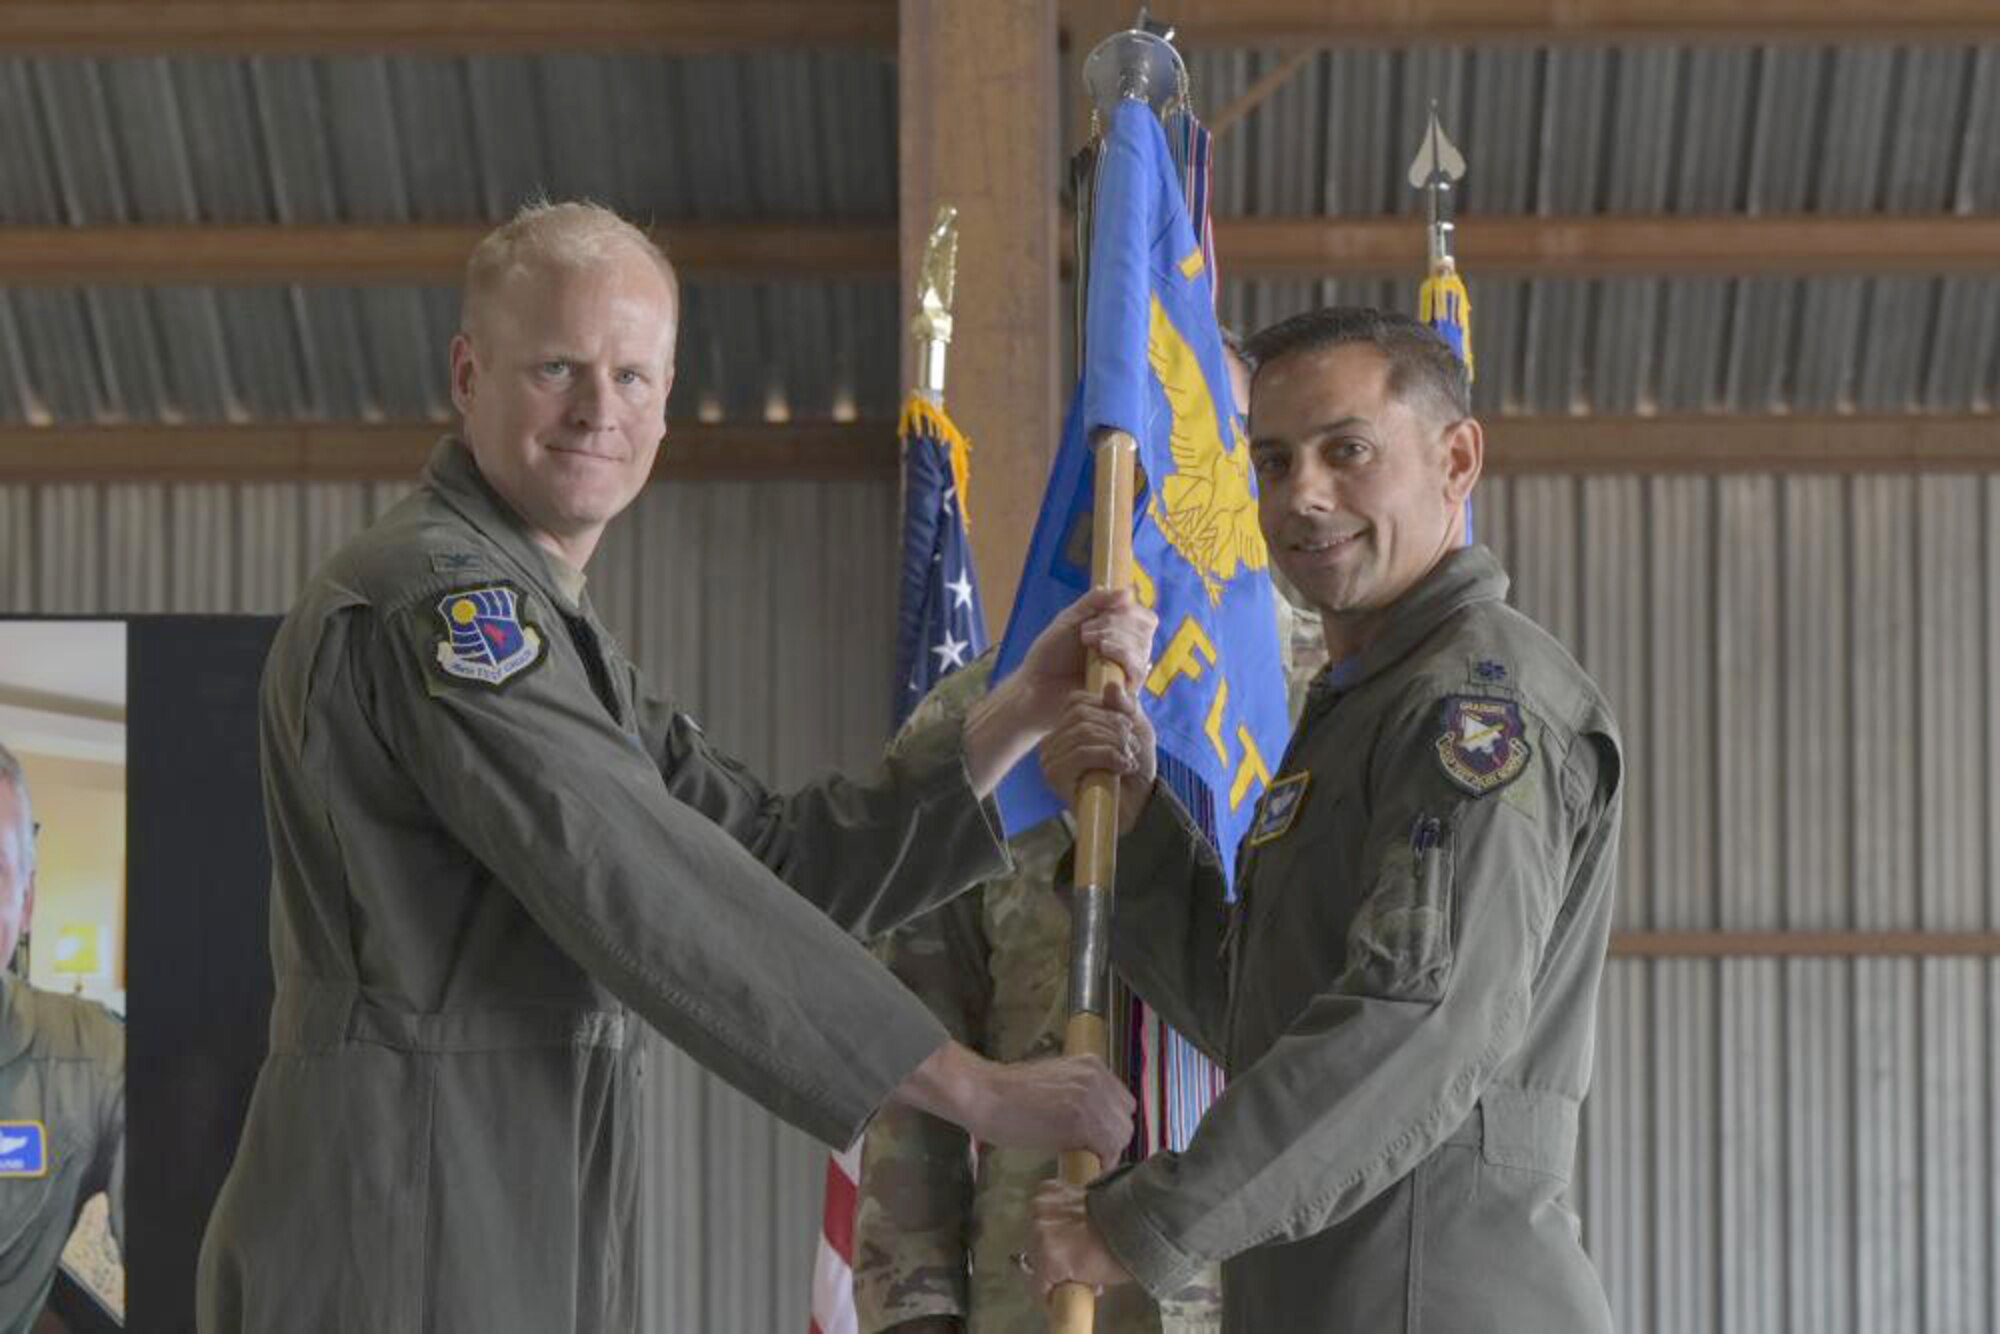 Lt. Col. Sean Siddiqui, right, takes command of the 586th Flight Test Squadron from Col. Darren Wees, 704th Test Group commander, on Holloman Air Force Base, New Mexico July 15, 2022. The 586th FLTS plans, analyzes, coordinates and conducts flight tests of advanced weapons and avionics systems primarily on the White Sands Missile Range. (U.S. Air Force photo by Airman 1st Class Antonio Salfran)